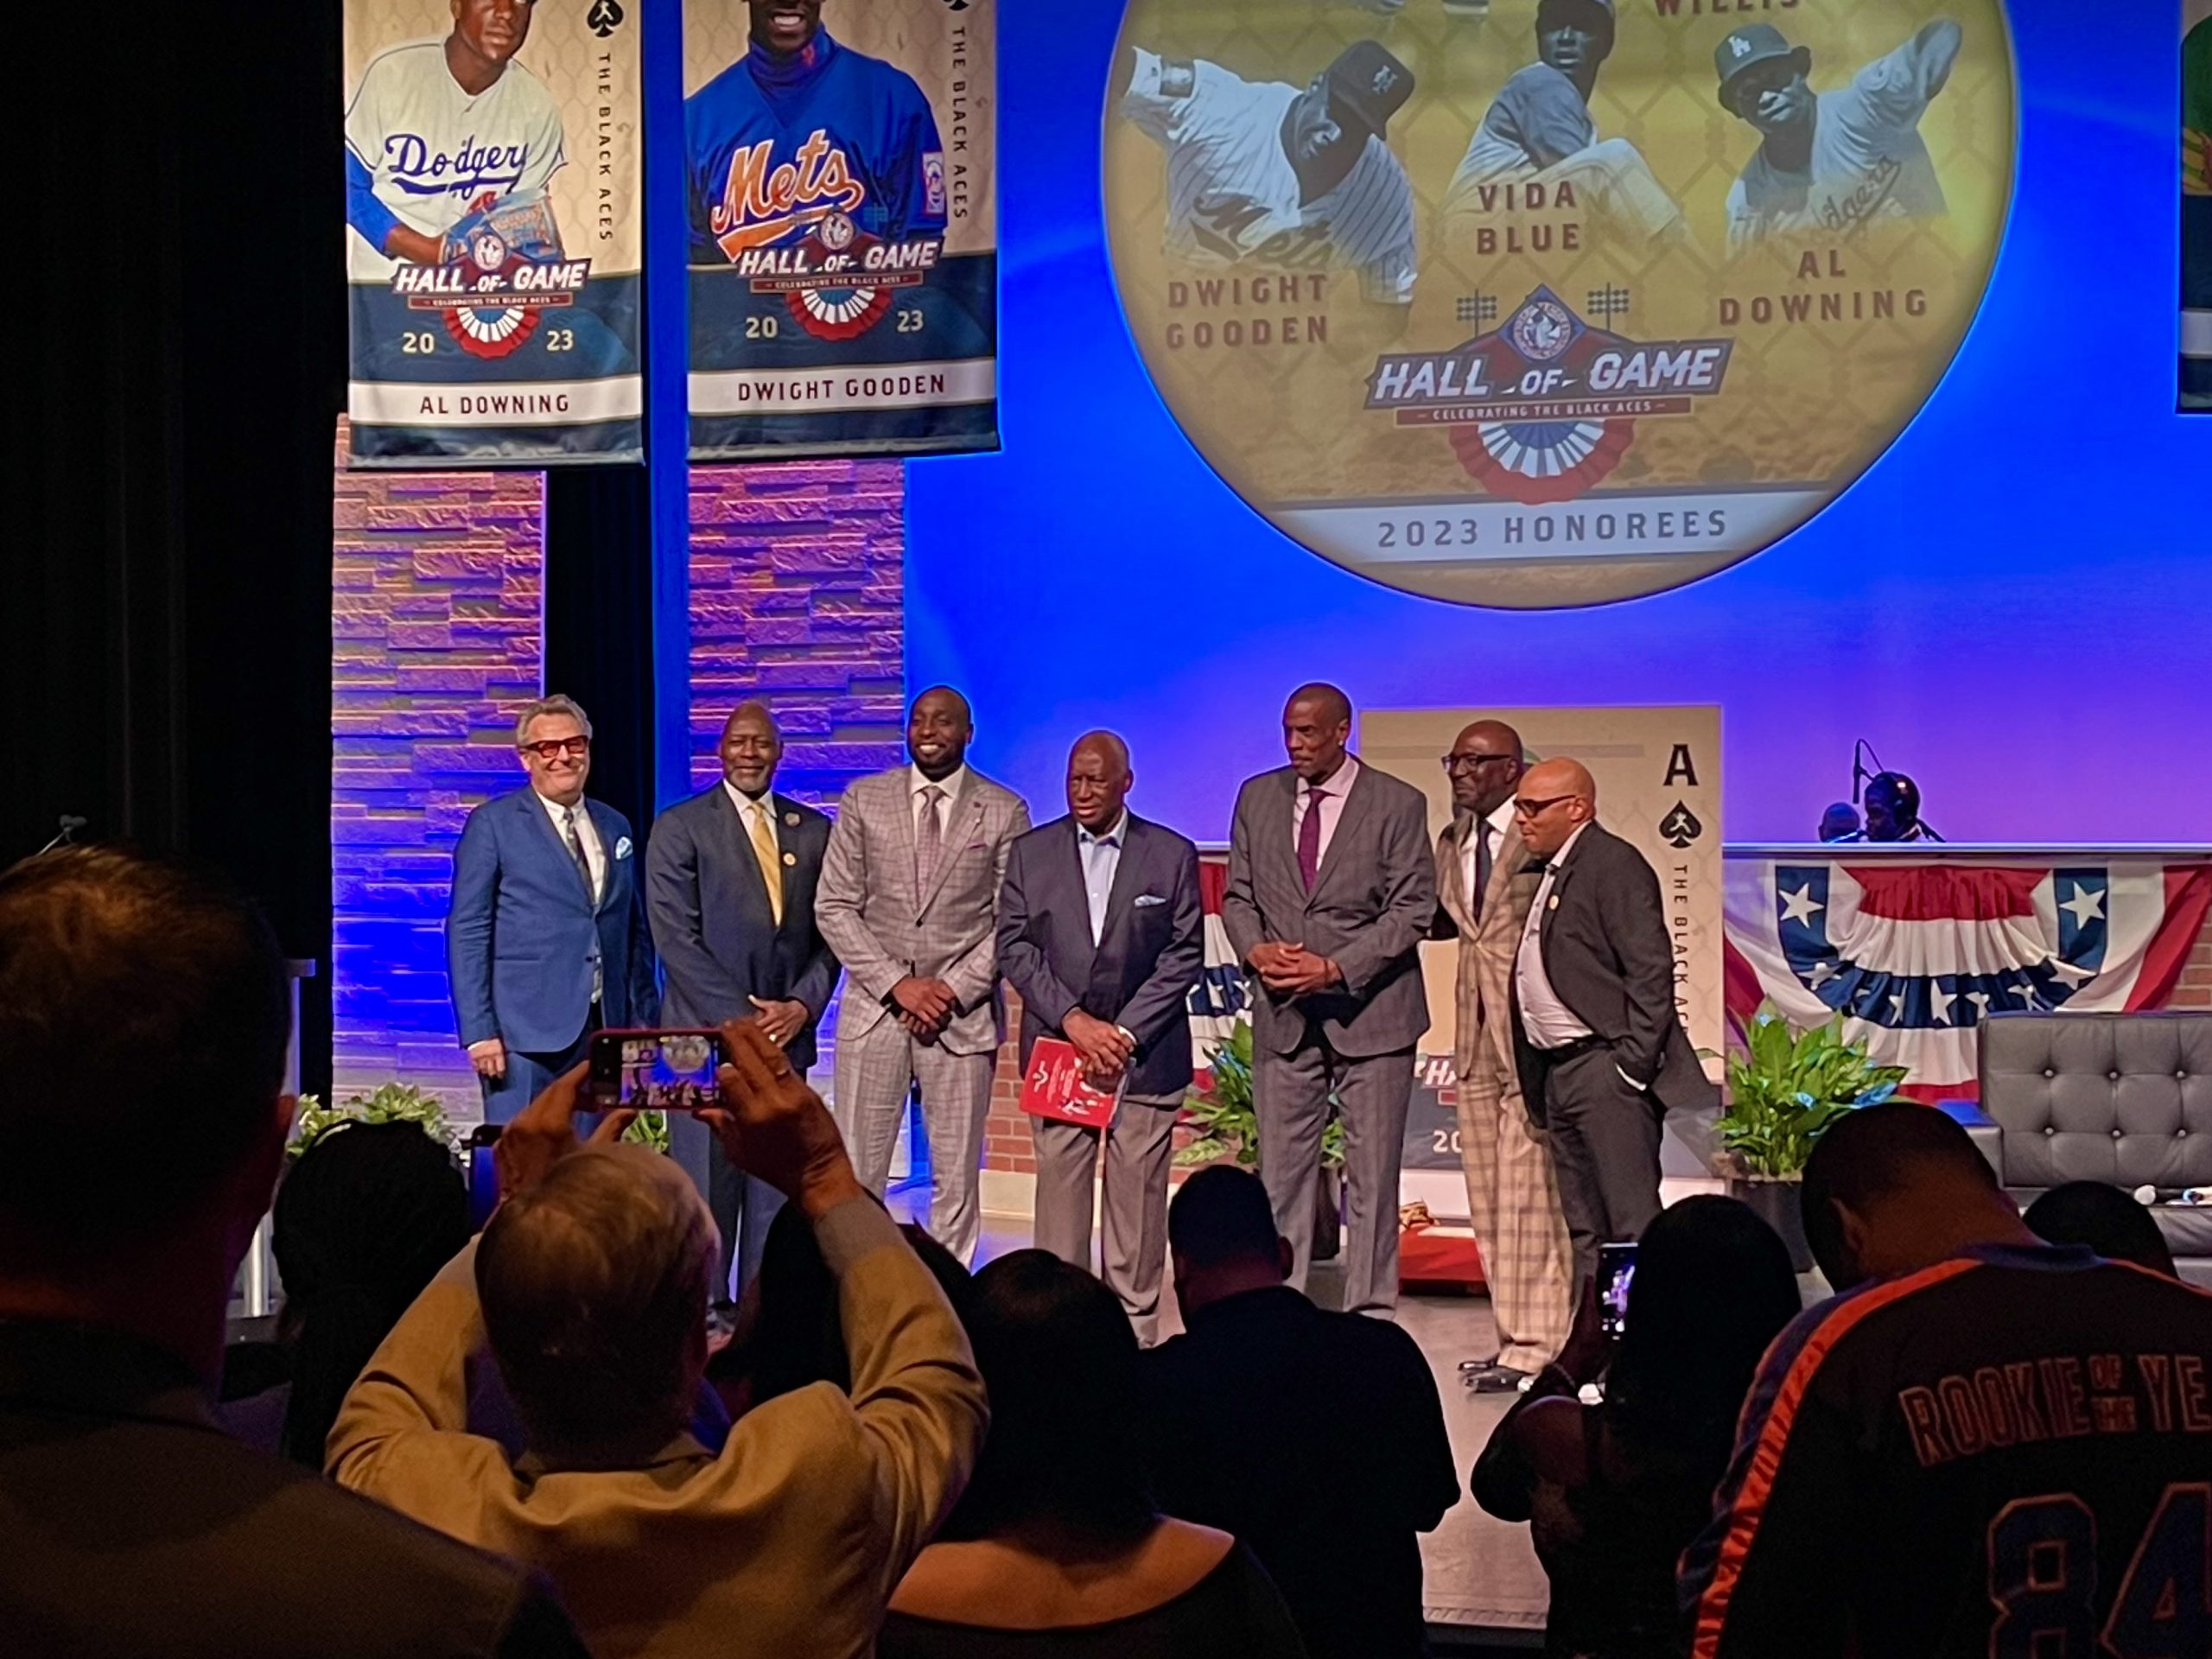 Introducing the Negro Leagues Baseball Museum's 2023 Hall of Game Class. -  Vida Blue (posthumous) - Al Downing - Dwight Gooden - Mike…